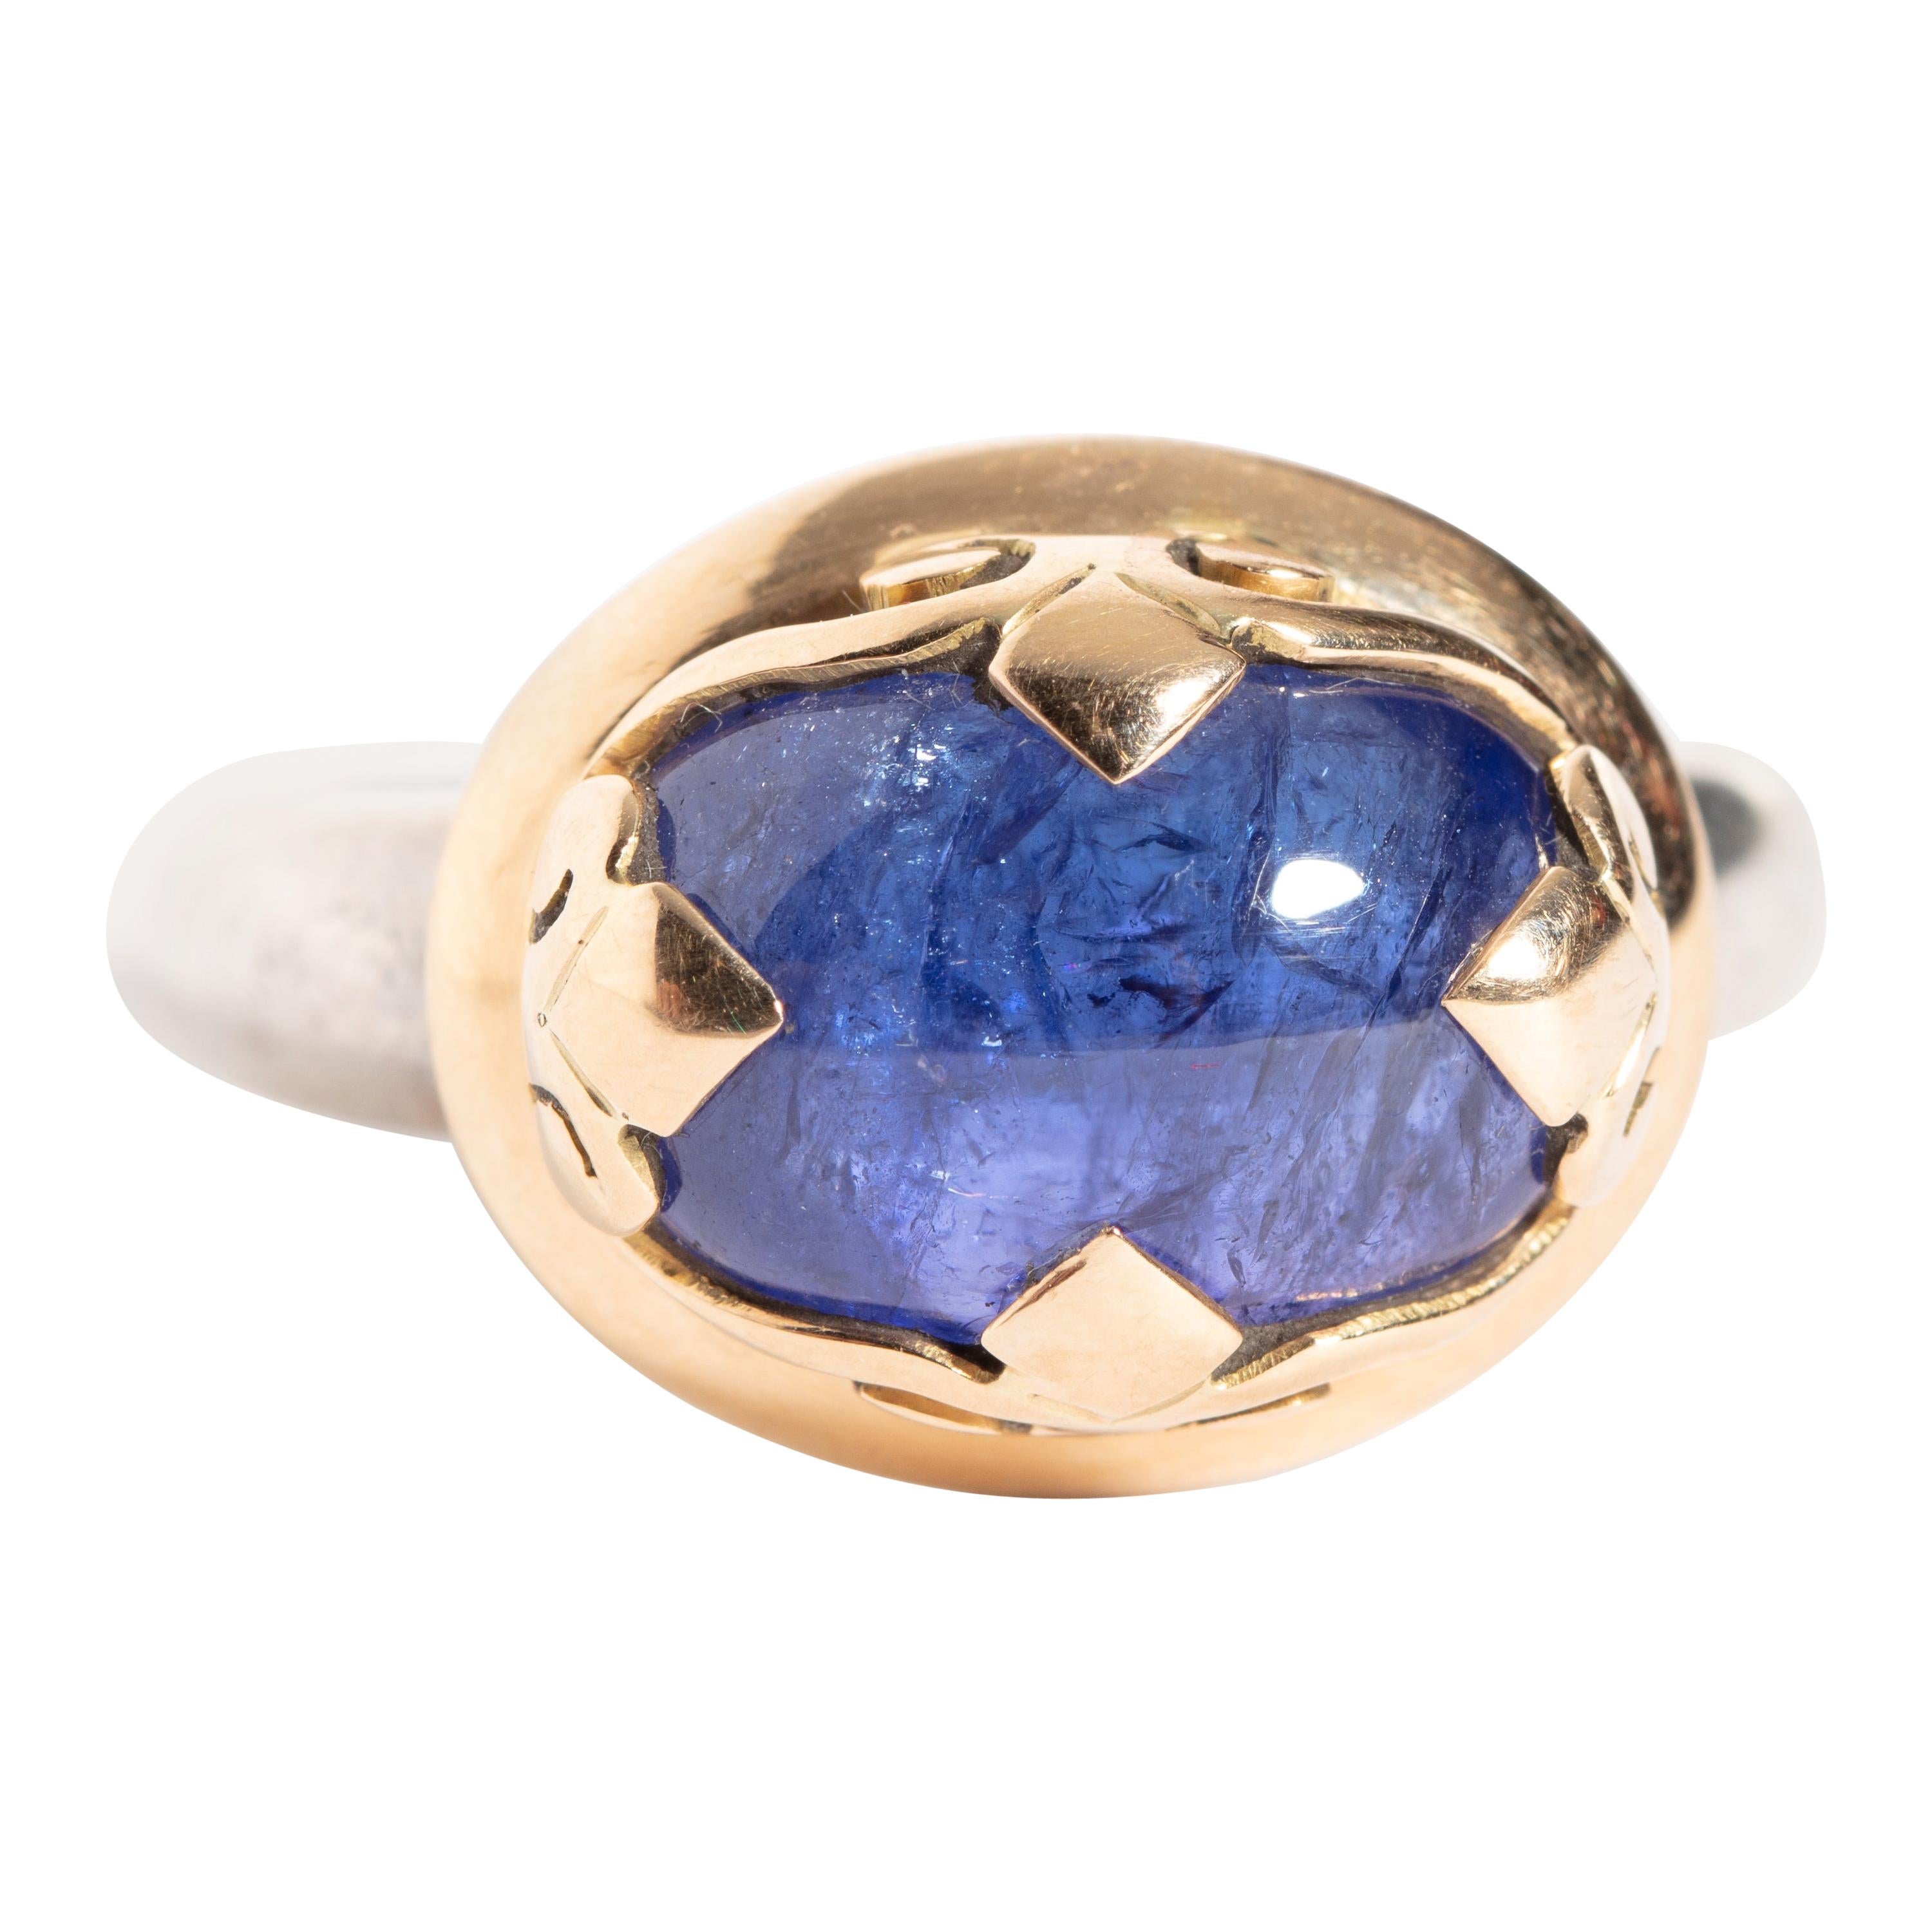 Blue Sapphire Ring in 18 Karat Gold and Sterling Silver Band